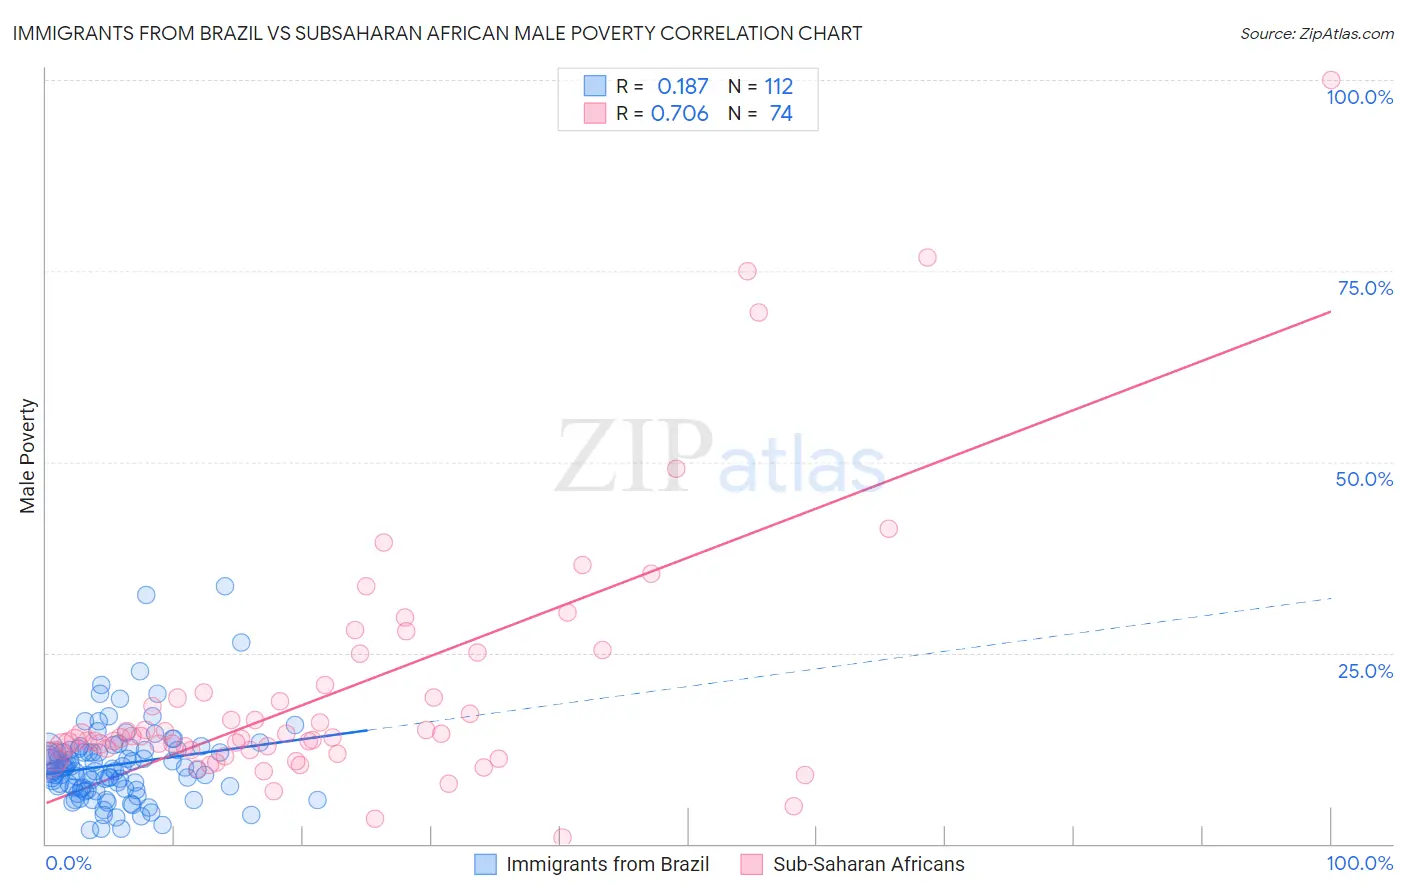 Immigrants from Brazil vs Subsaharan African Male Poverty